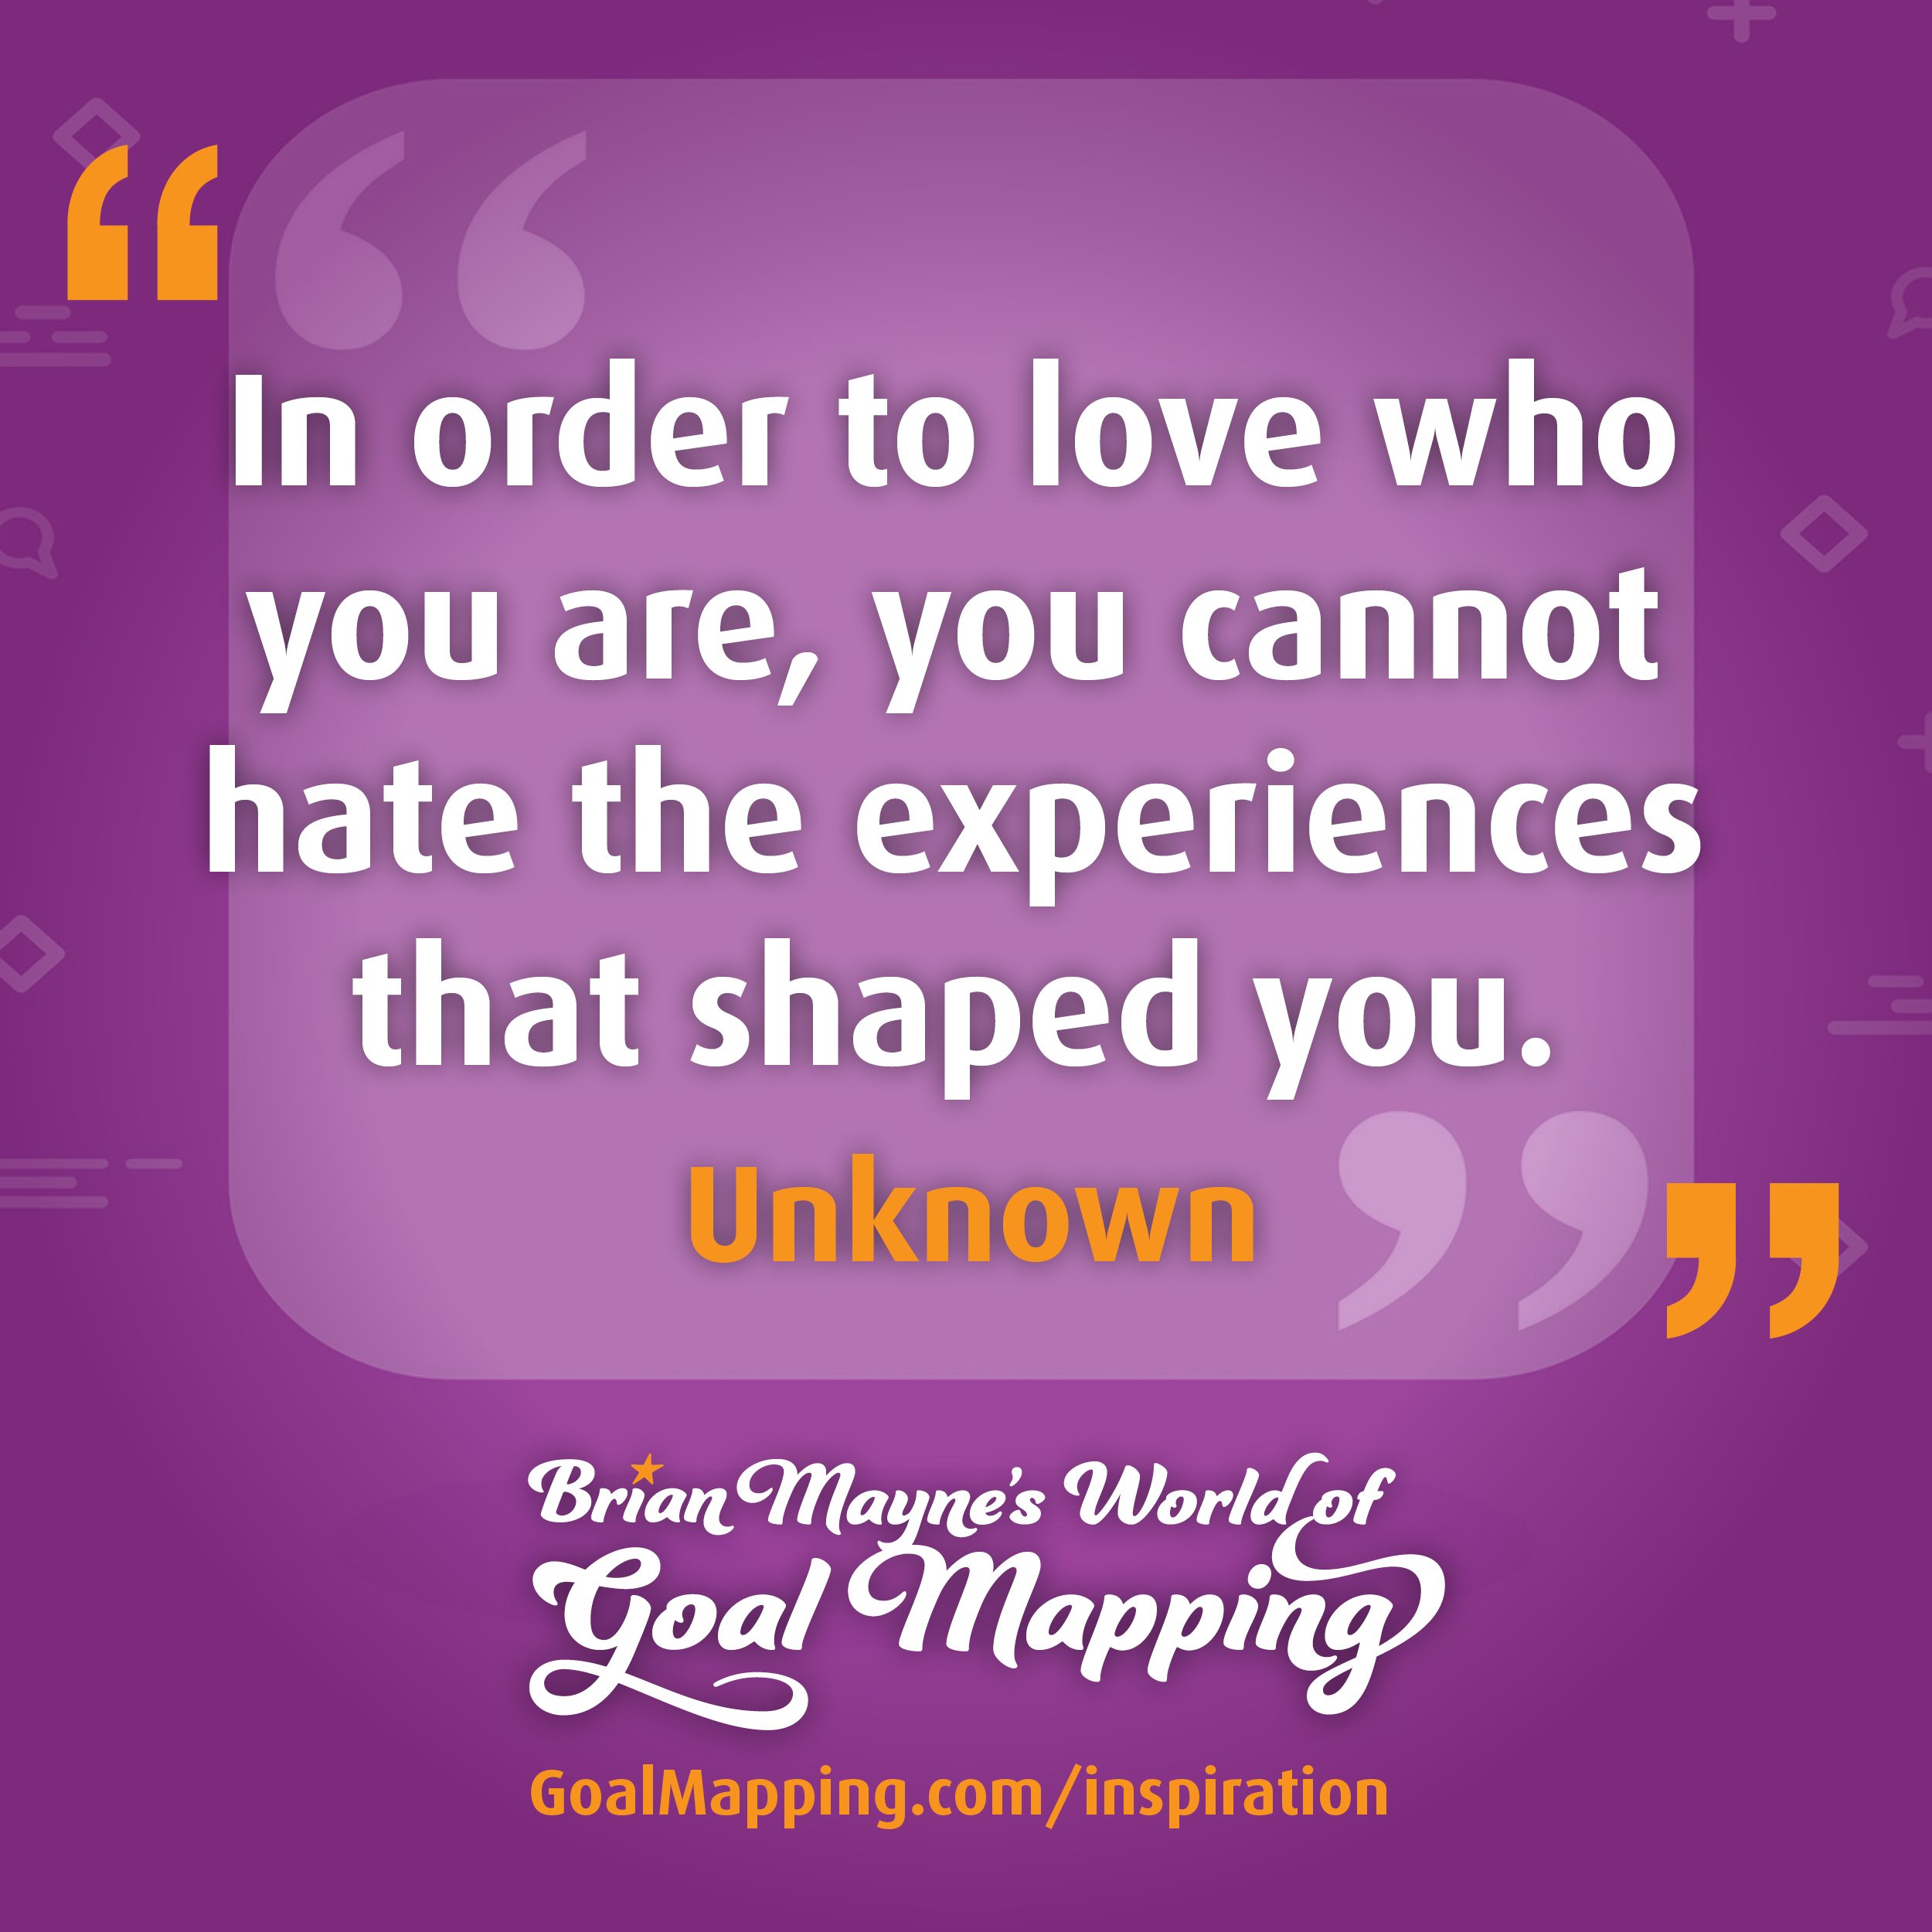 "In order to love who you are, you cannot hate the experiences that shaped you" Unknown